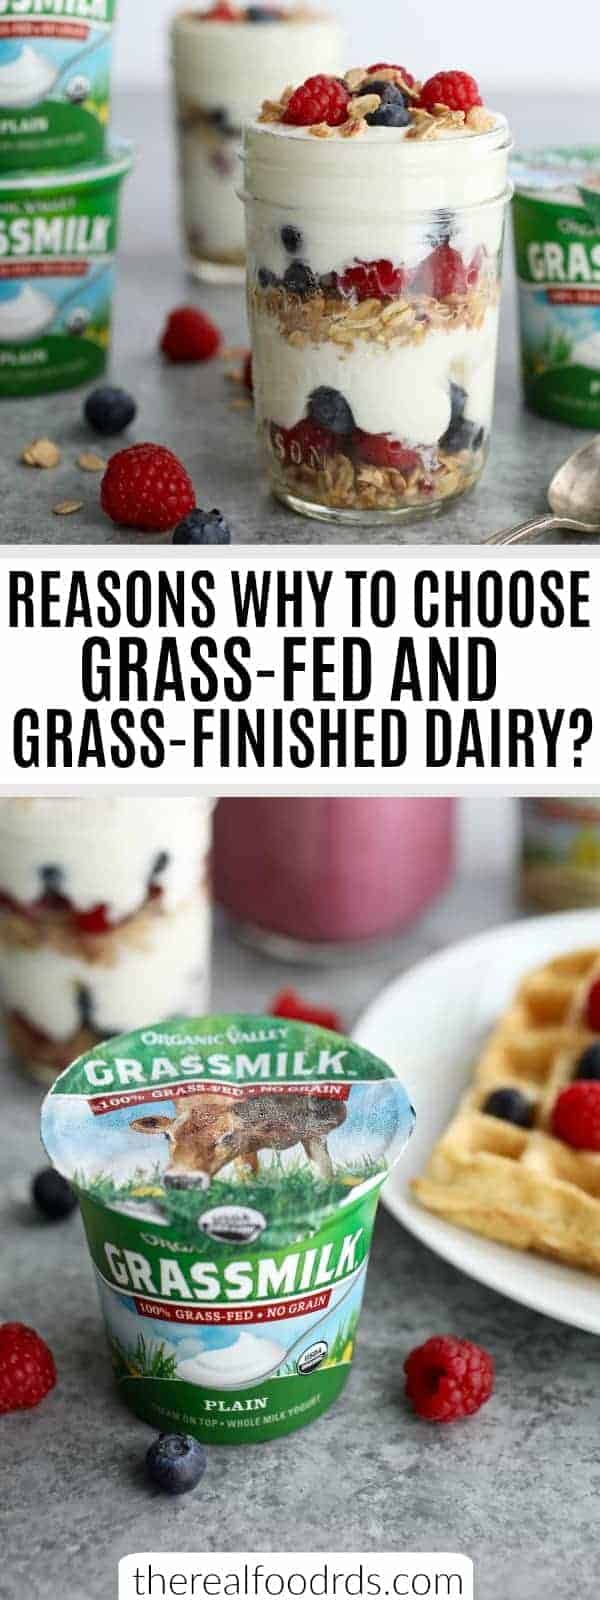 Pinterest Image for Reasons to Choose Grass-Fed Dairy